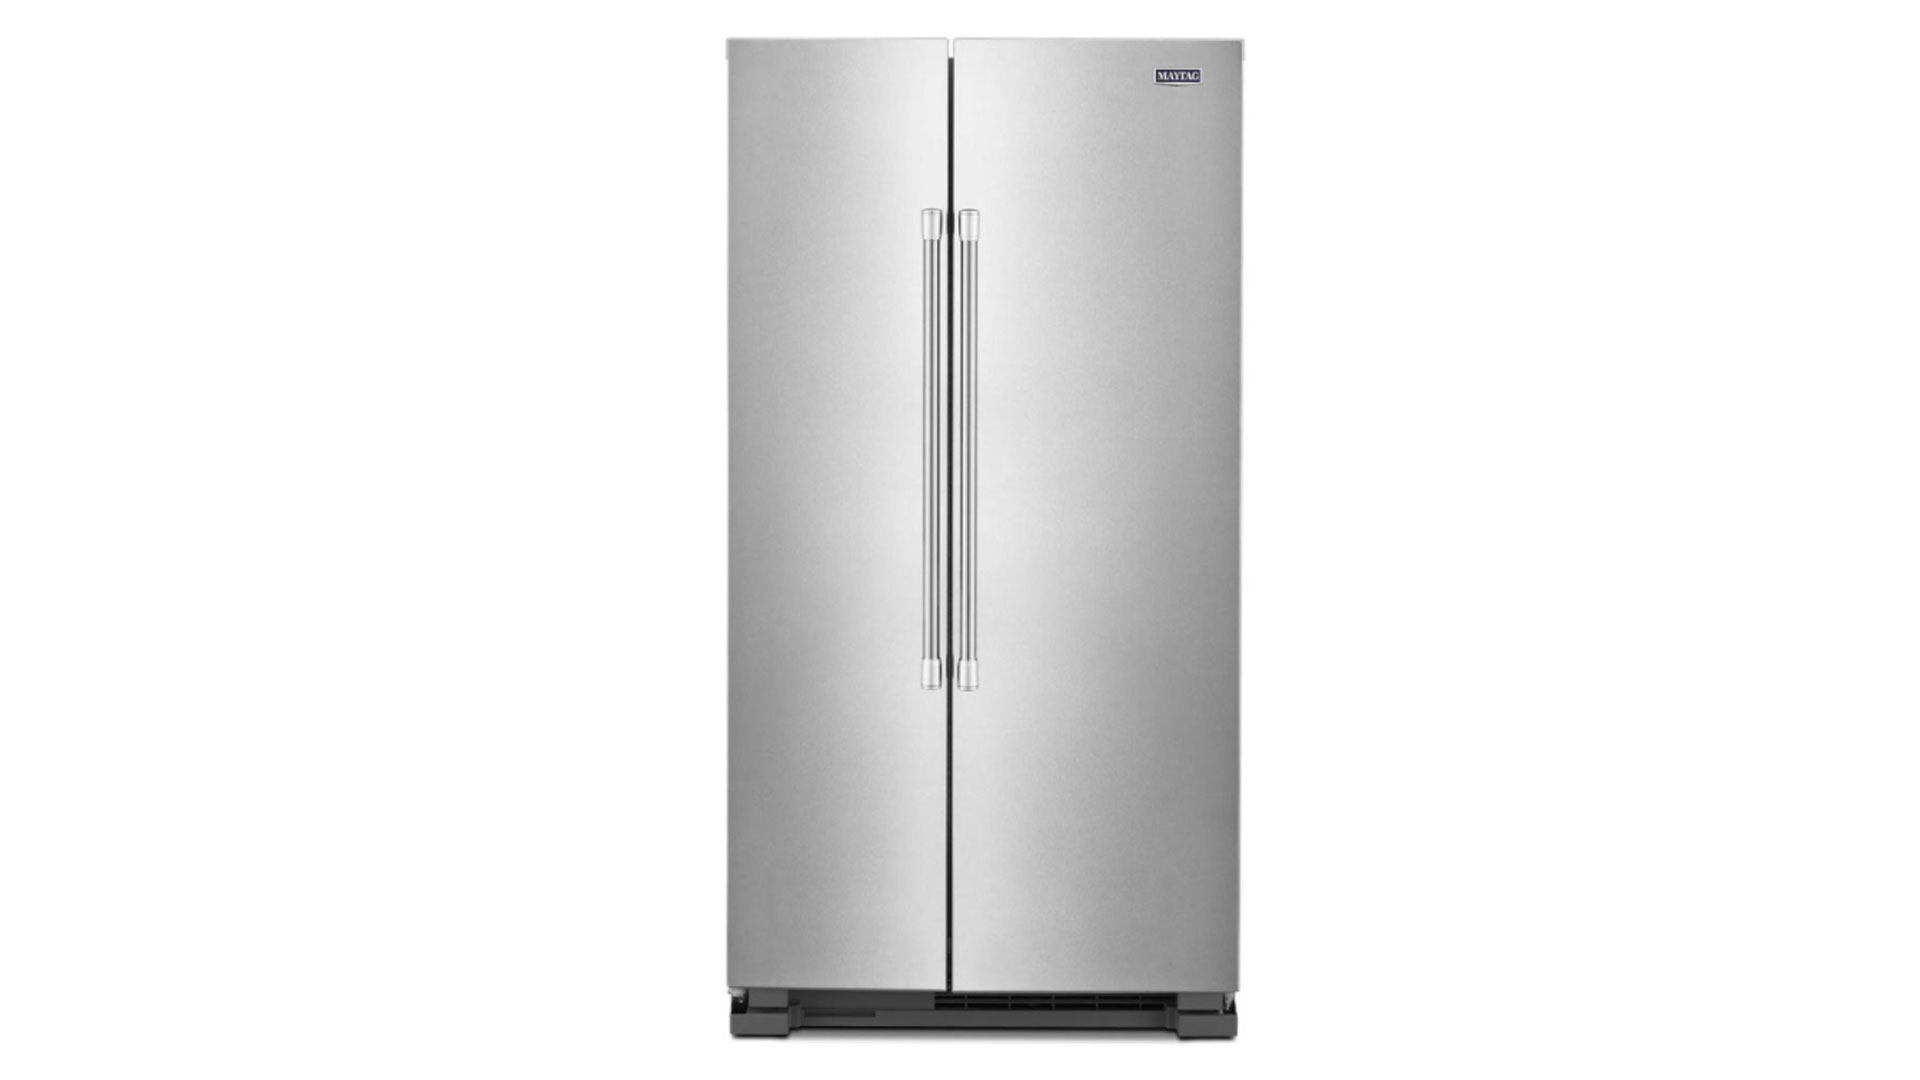 Maytag MSS25N4MKZ: Image shows front of refrigerator